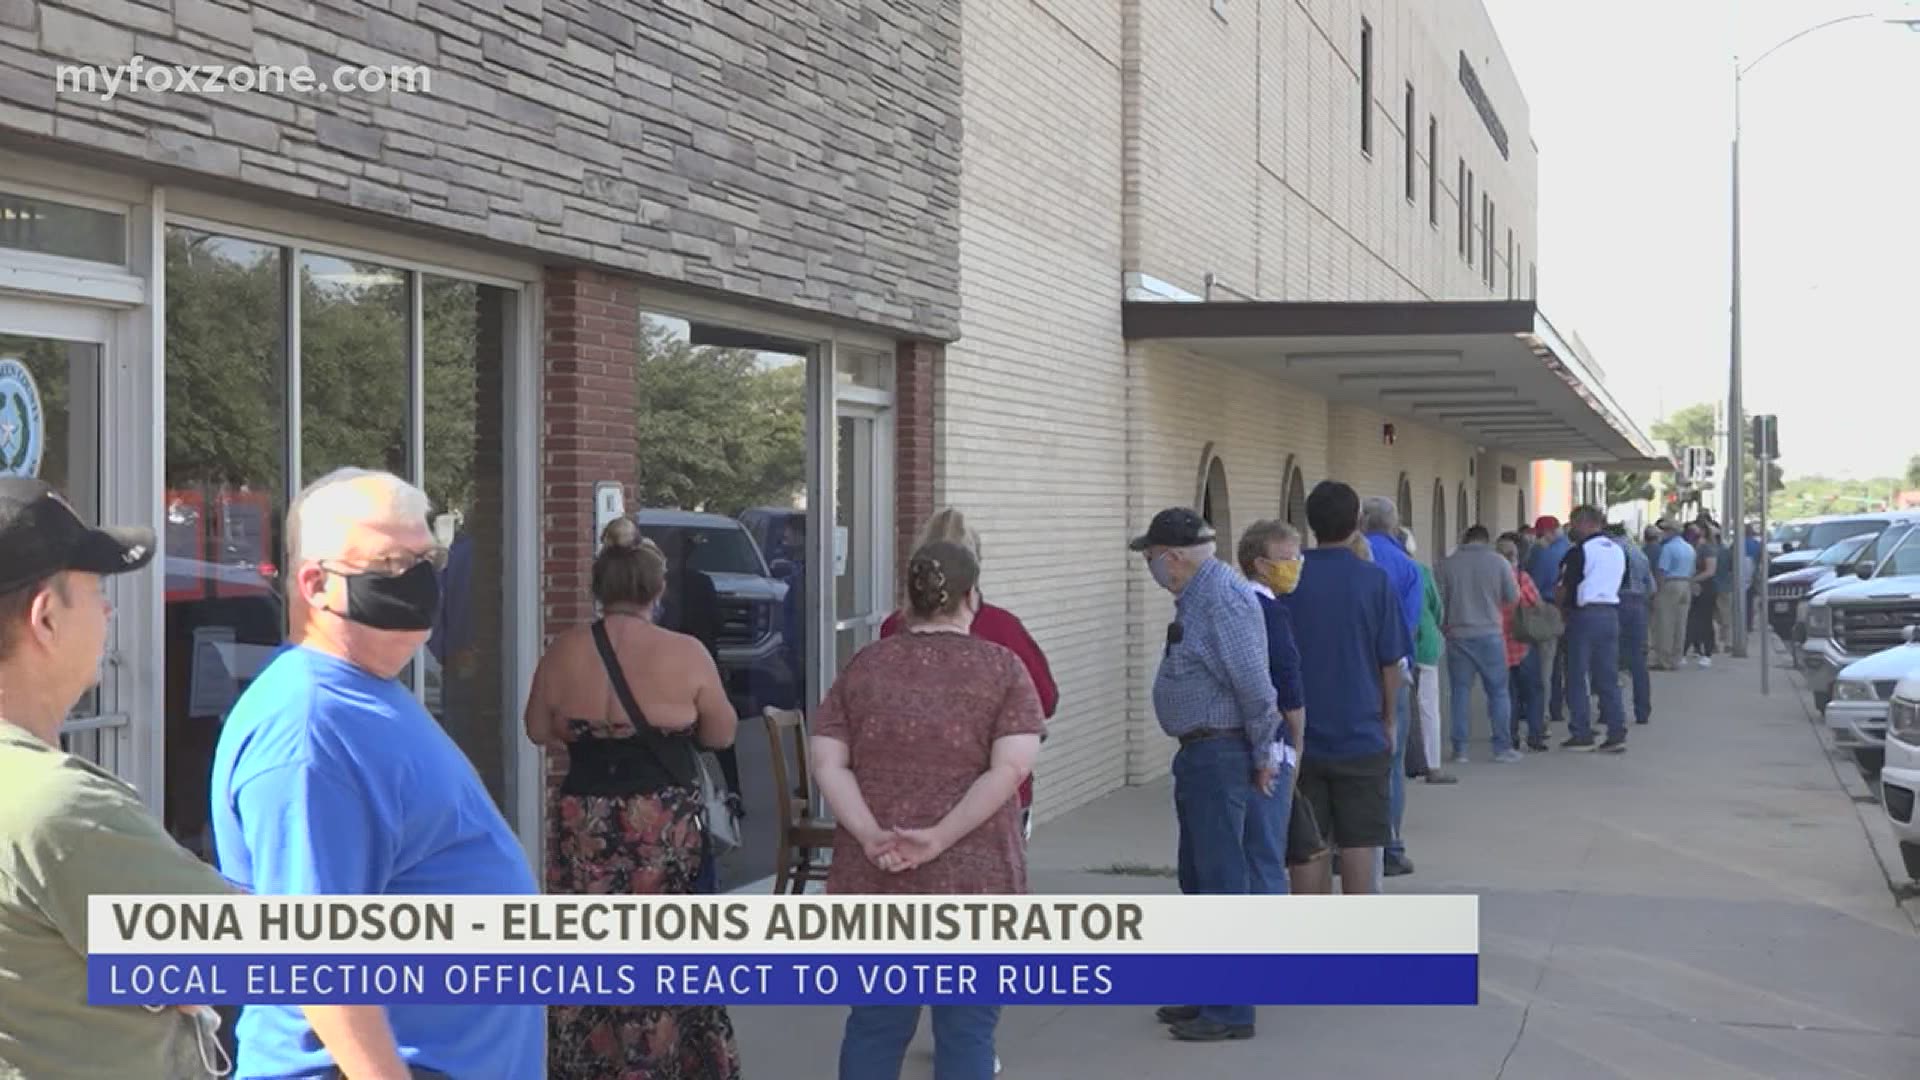 Senate Bill seven will allow partisan poll watchers to record voters who need ballot help if activity appears illegal.